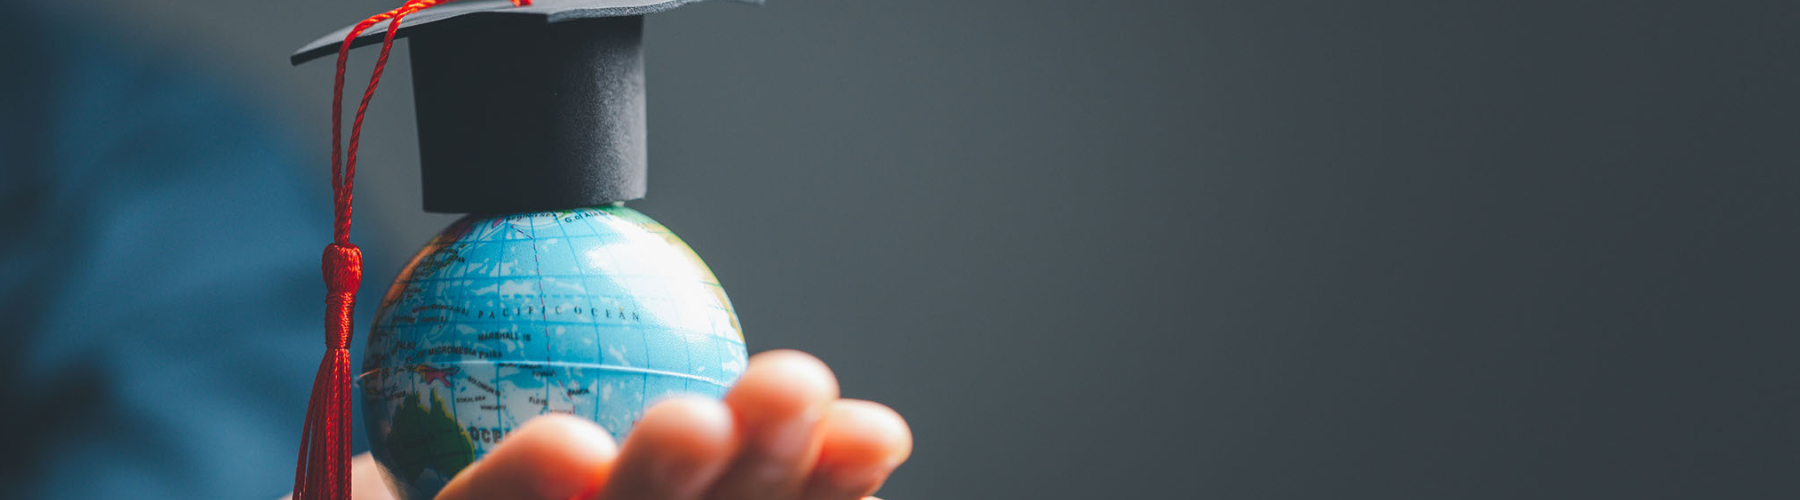 image of a hand on the left hand side holding a small globe with a cap on it